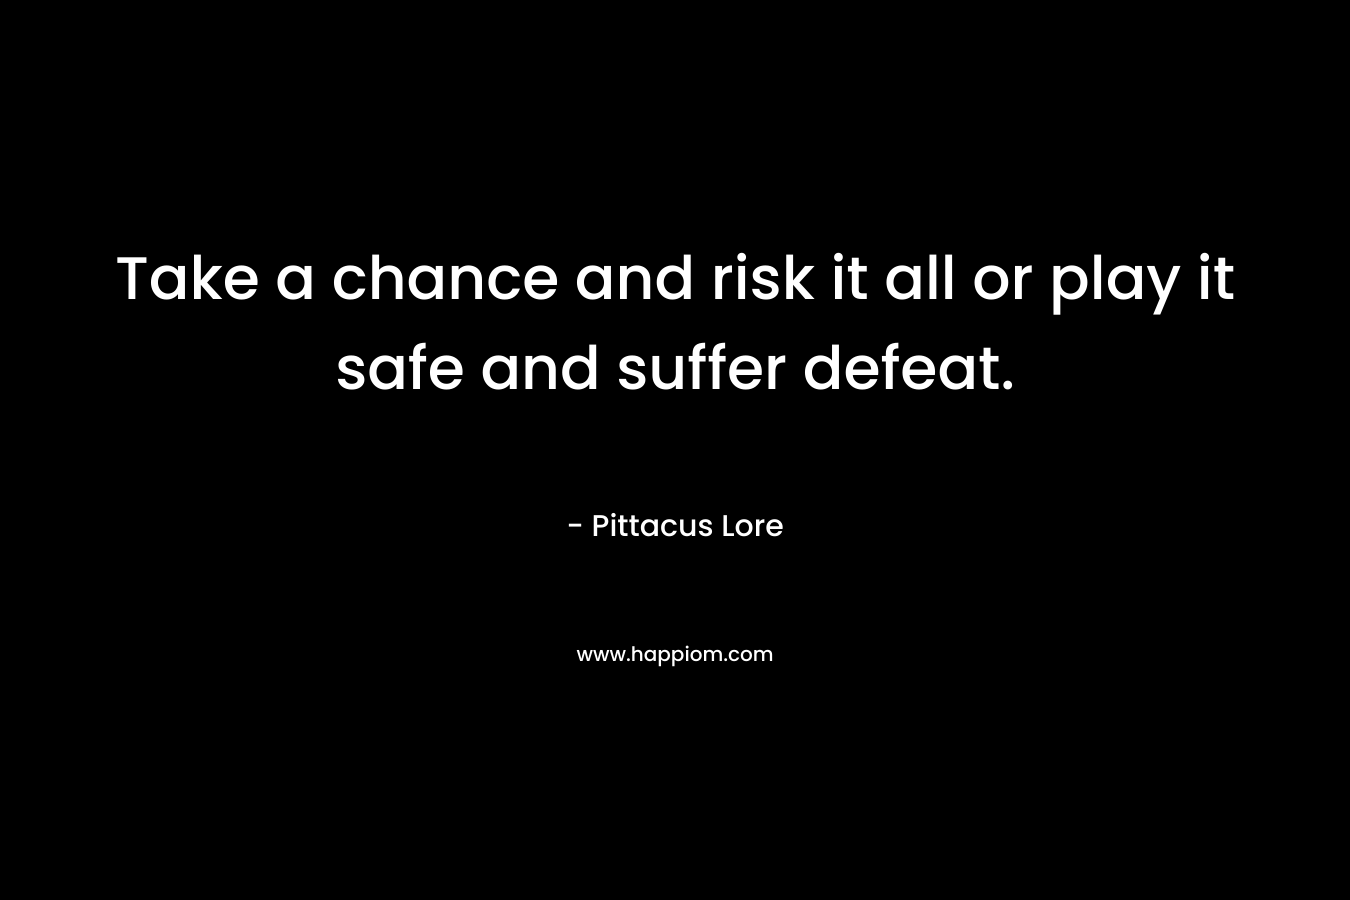 Take a chance and risk it all or play it safe and suffer defeat.